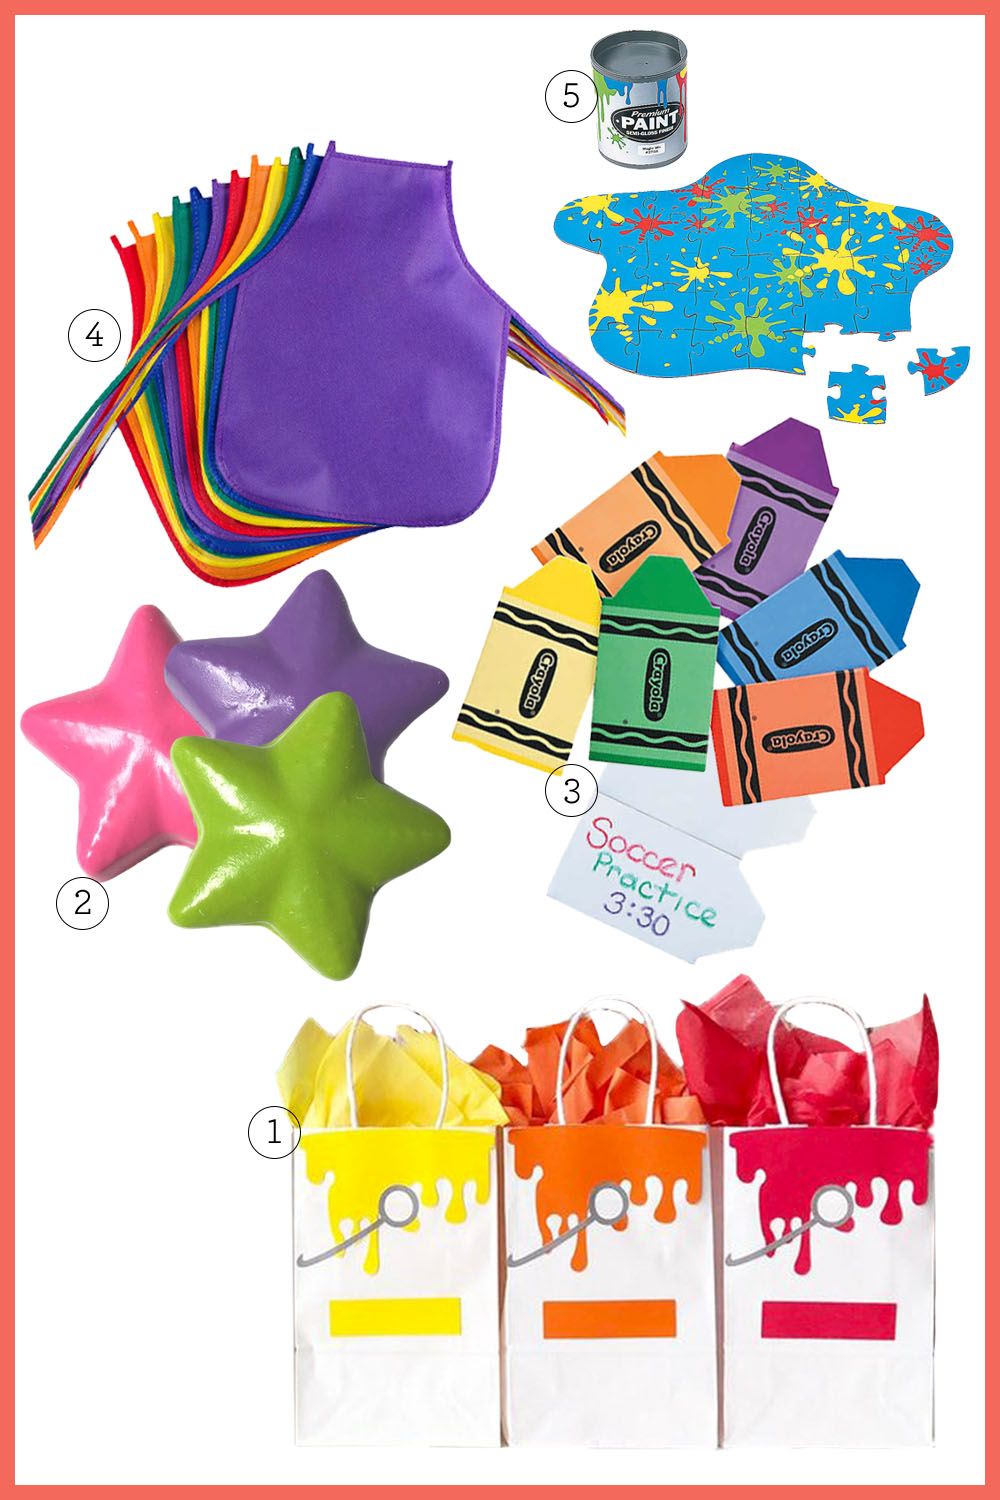 Best Goodie Bag Ideas for Kids' Birthday Parties - Cheap, Fun Kids' Party  Favors